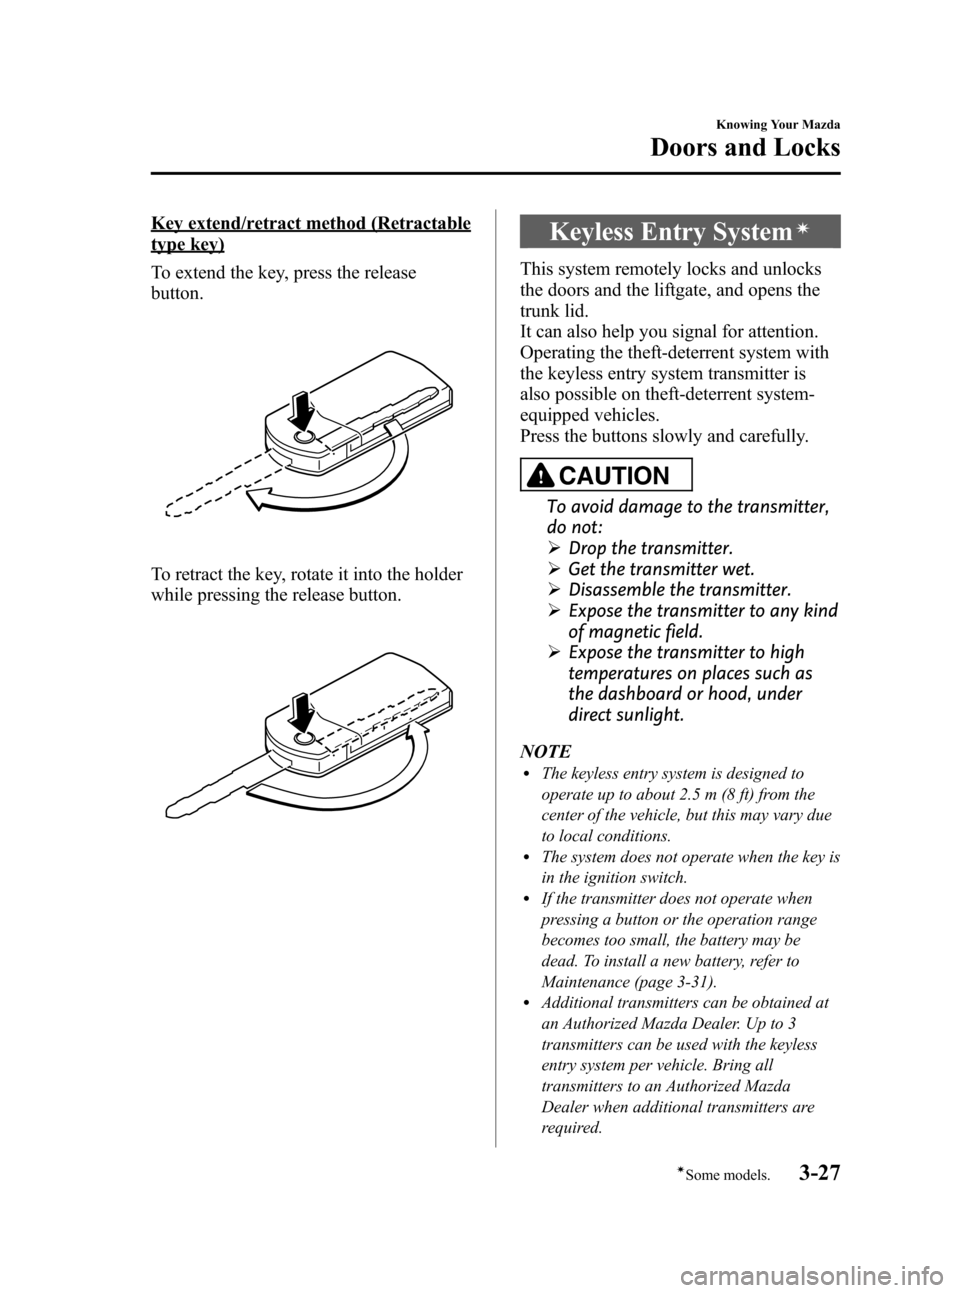 MAZDA MODEL 3 HATCHBACK 2011  Owners Manual (in English) Black plate (103,1)
Key extend/retract method (Retractable
type key)
To extend the key, press the release
button.
To retract the key, rotate it into the holder
while pressing the release button.
Keyle